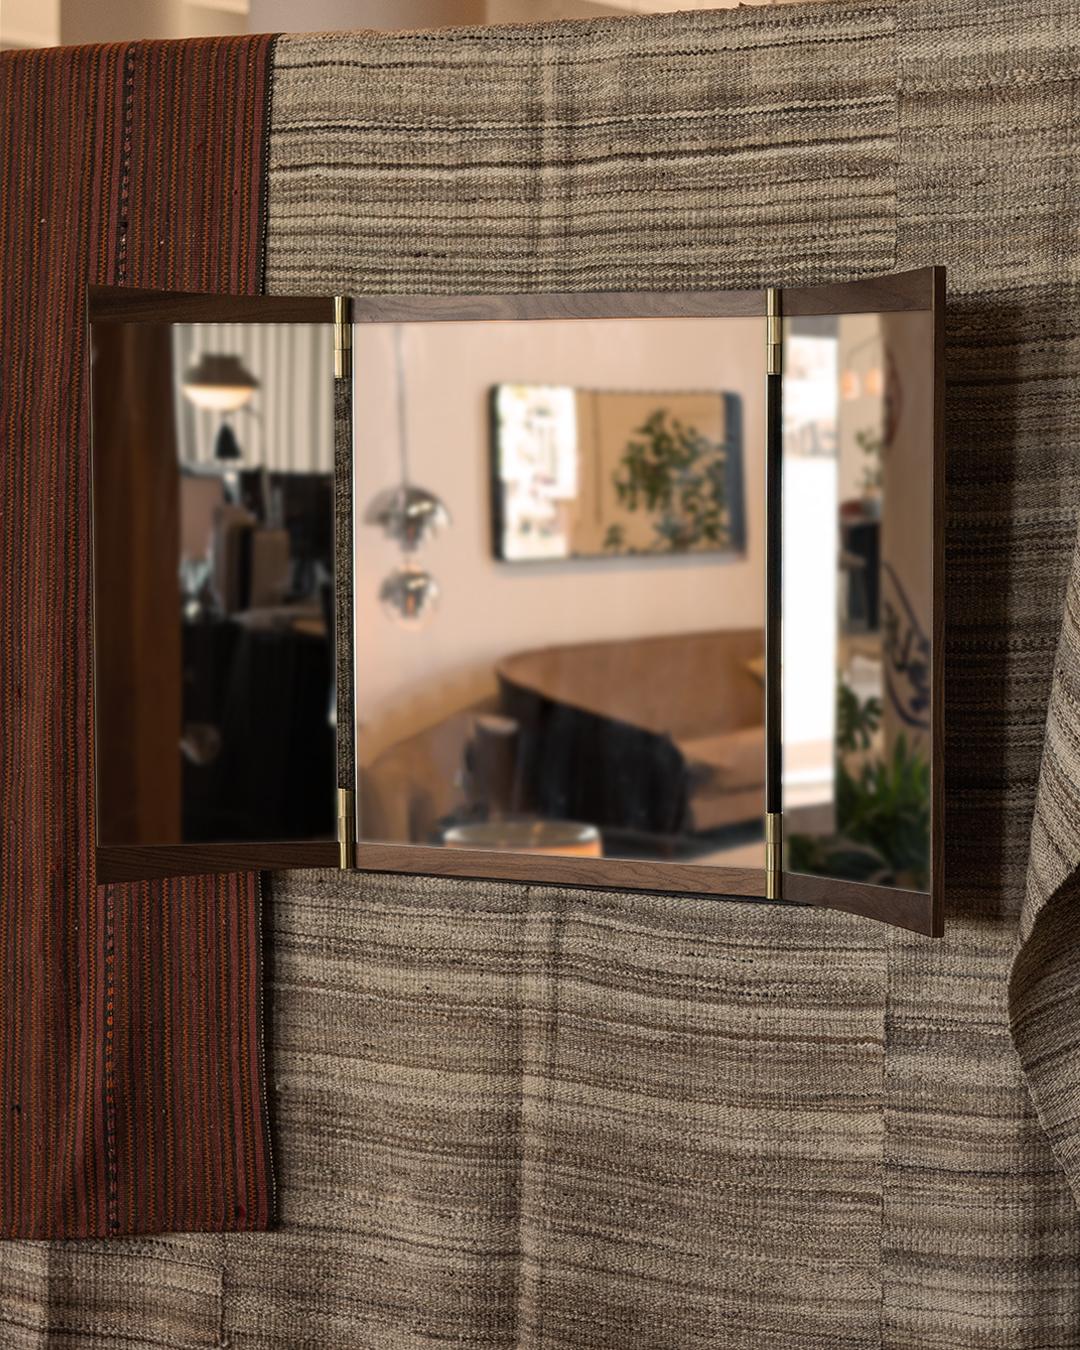 GamFratesi Three-Panel Vanity Mirror for GUBI.

This new collection of wall-mounted mirrors ingeniously reinvents the vanity mirror for contemporary interiors. Executed in walnut and brass, the Vanity mirror embodies GamFratesi’s ability to bring